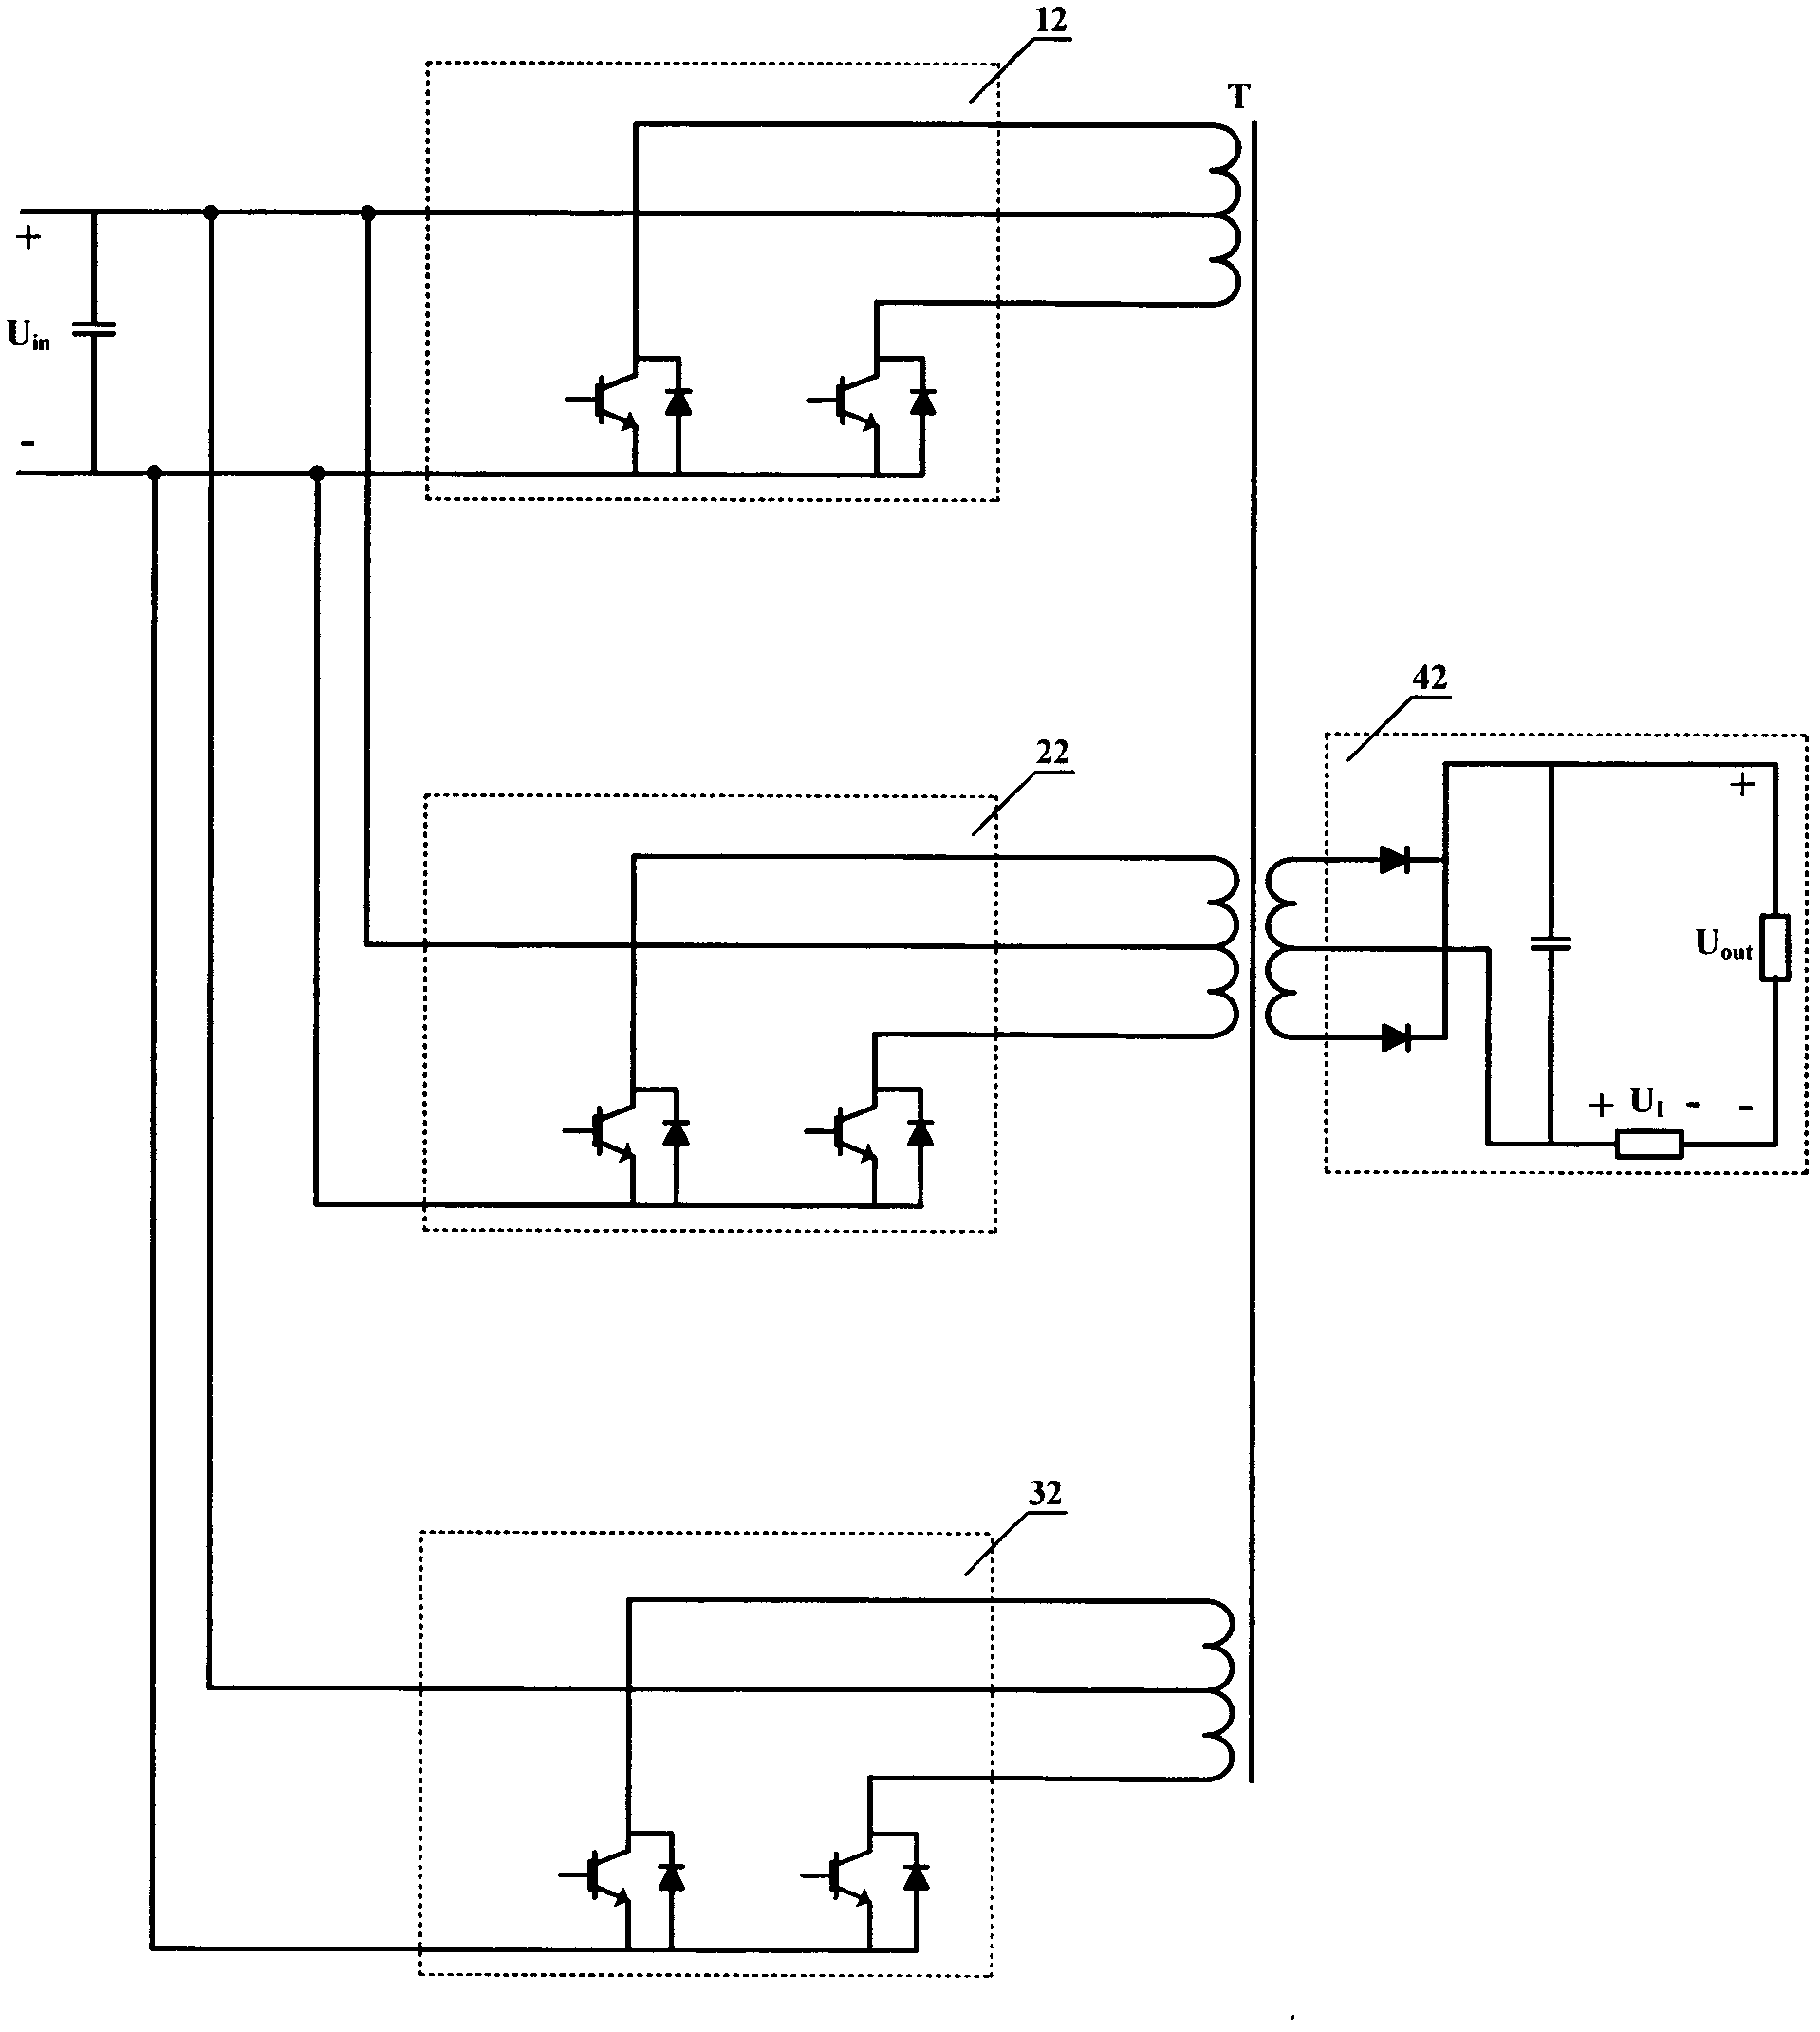 Multi-converter output can be cascaded switching power supply